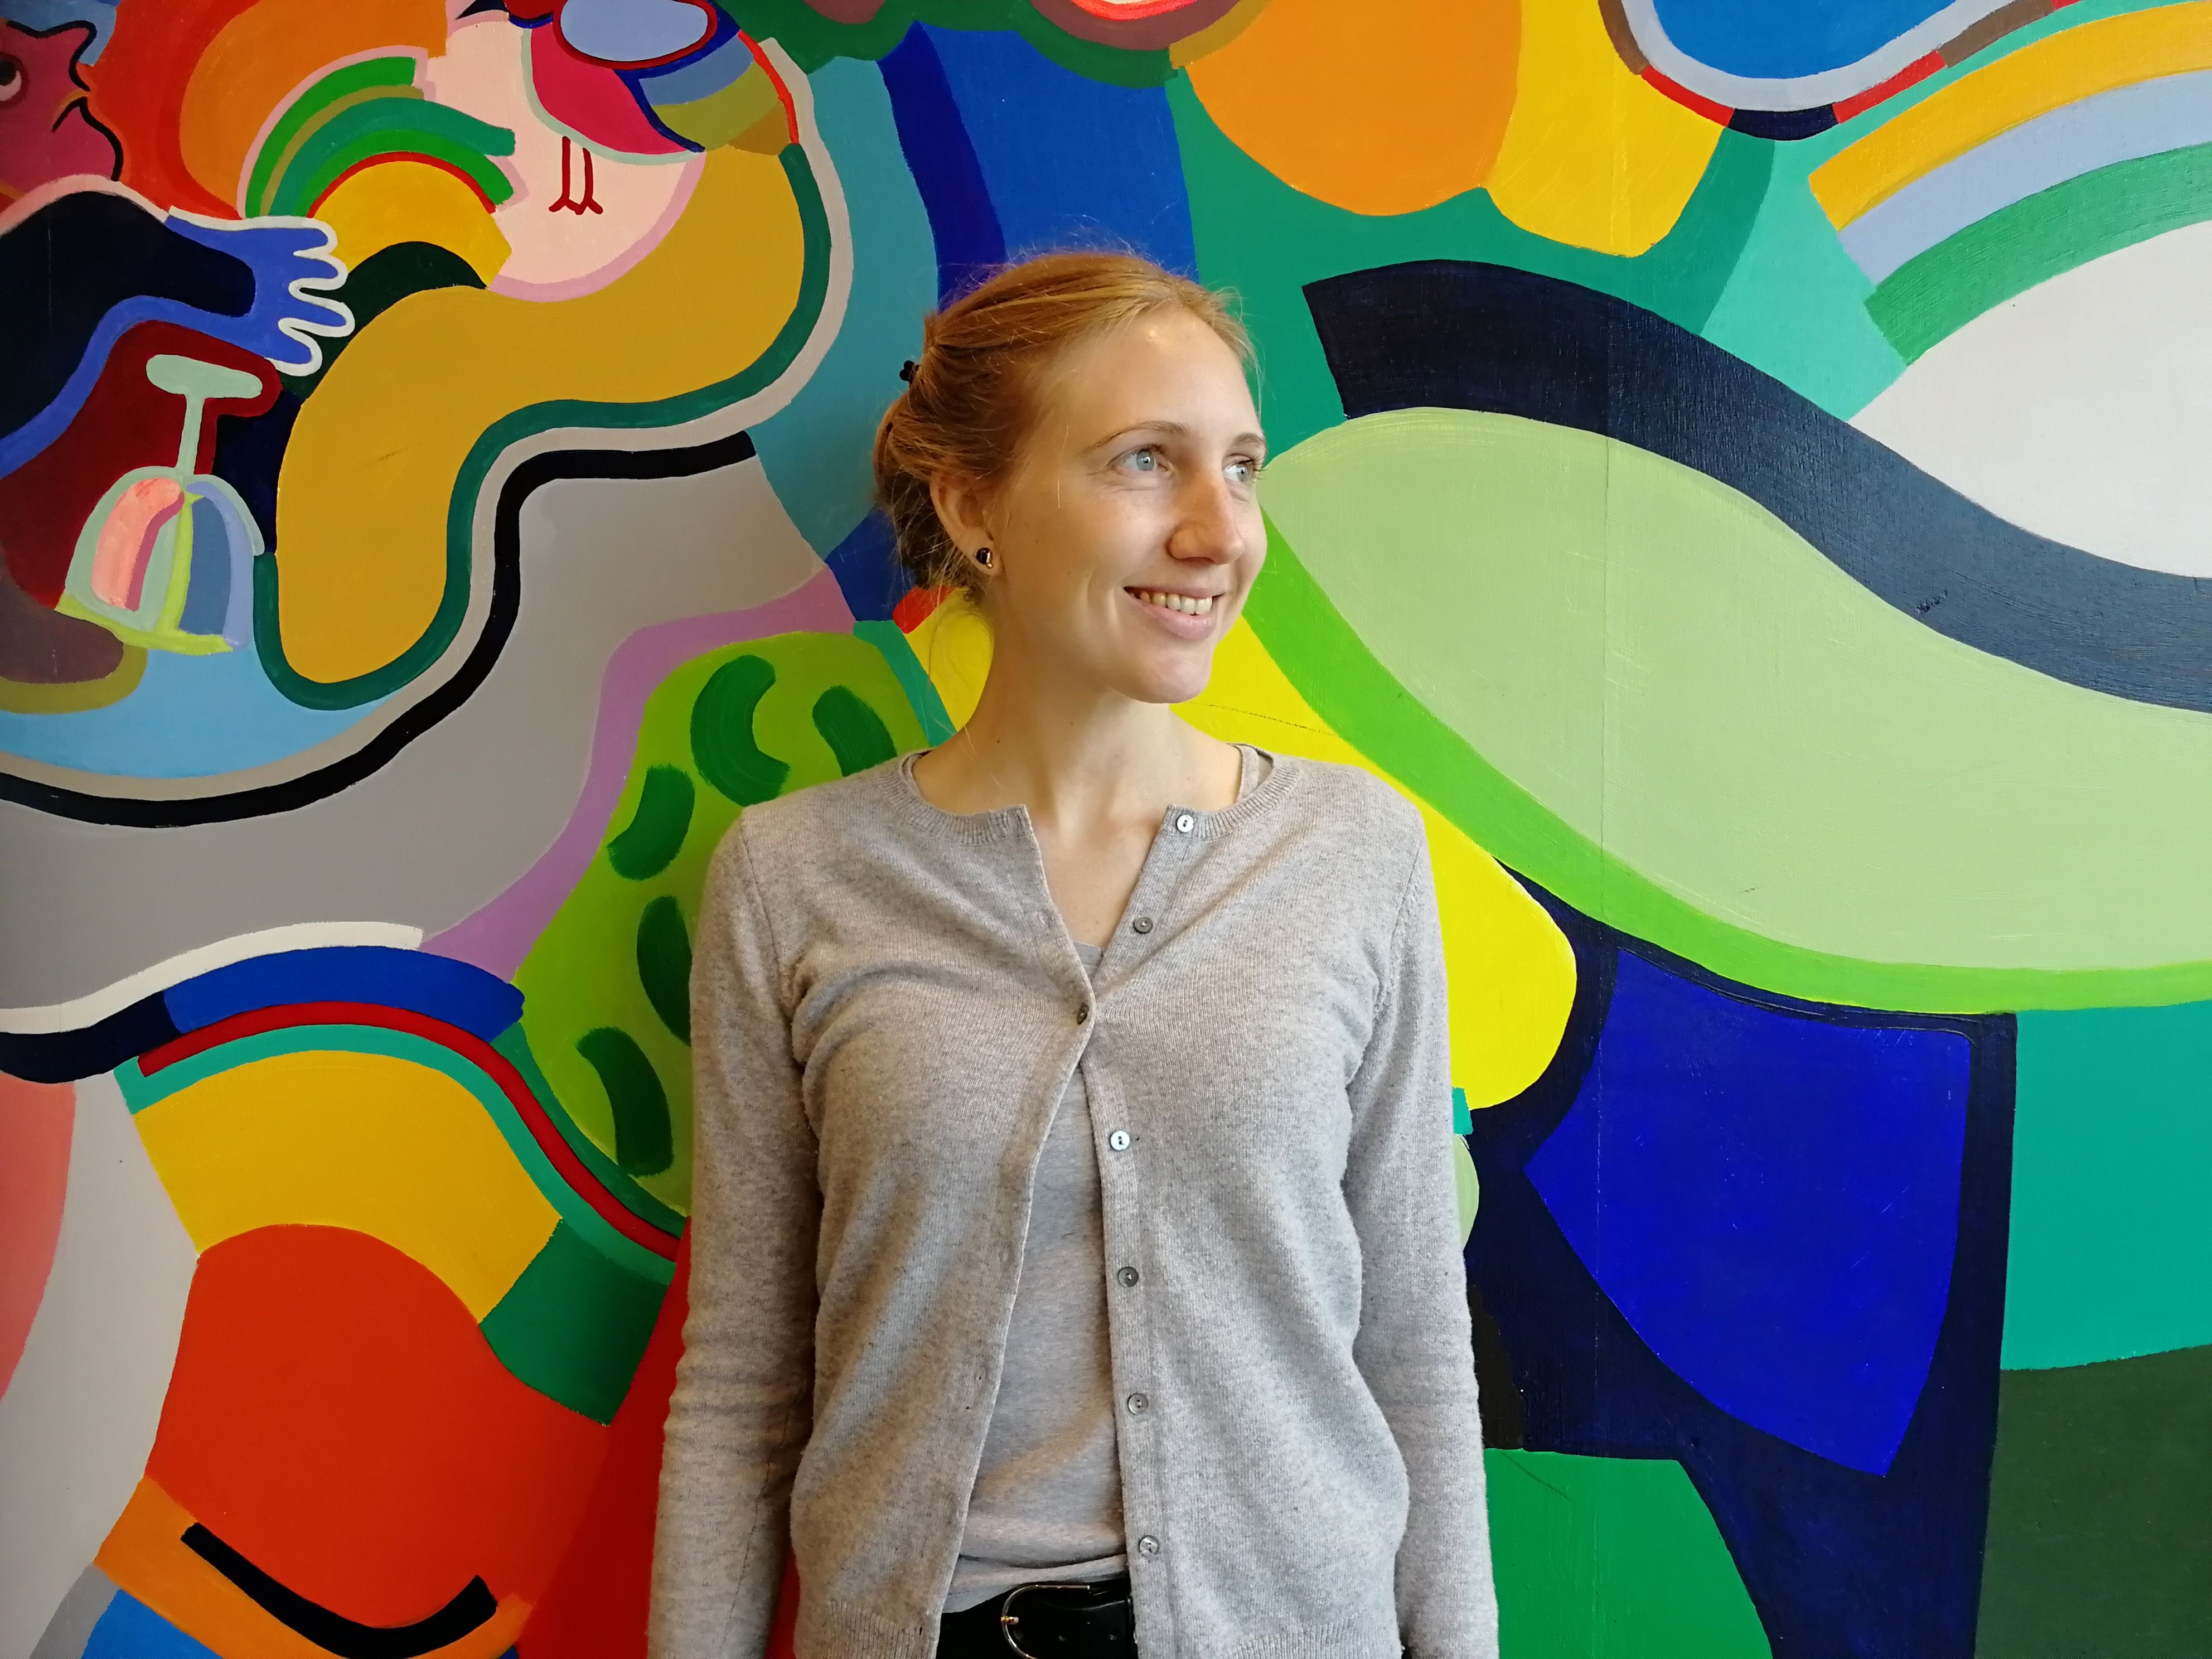 Hanna Fromell is a postdoctoral researcher at the Faculty of Economics and Business of the University of Groningen